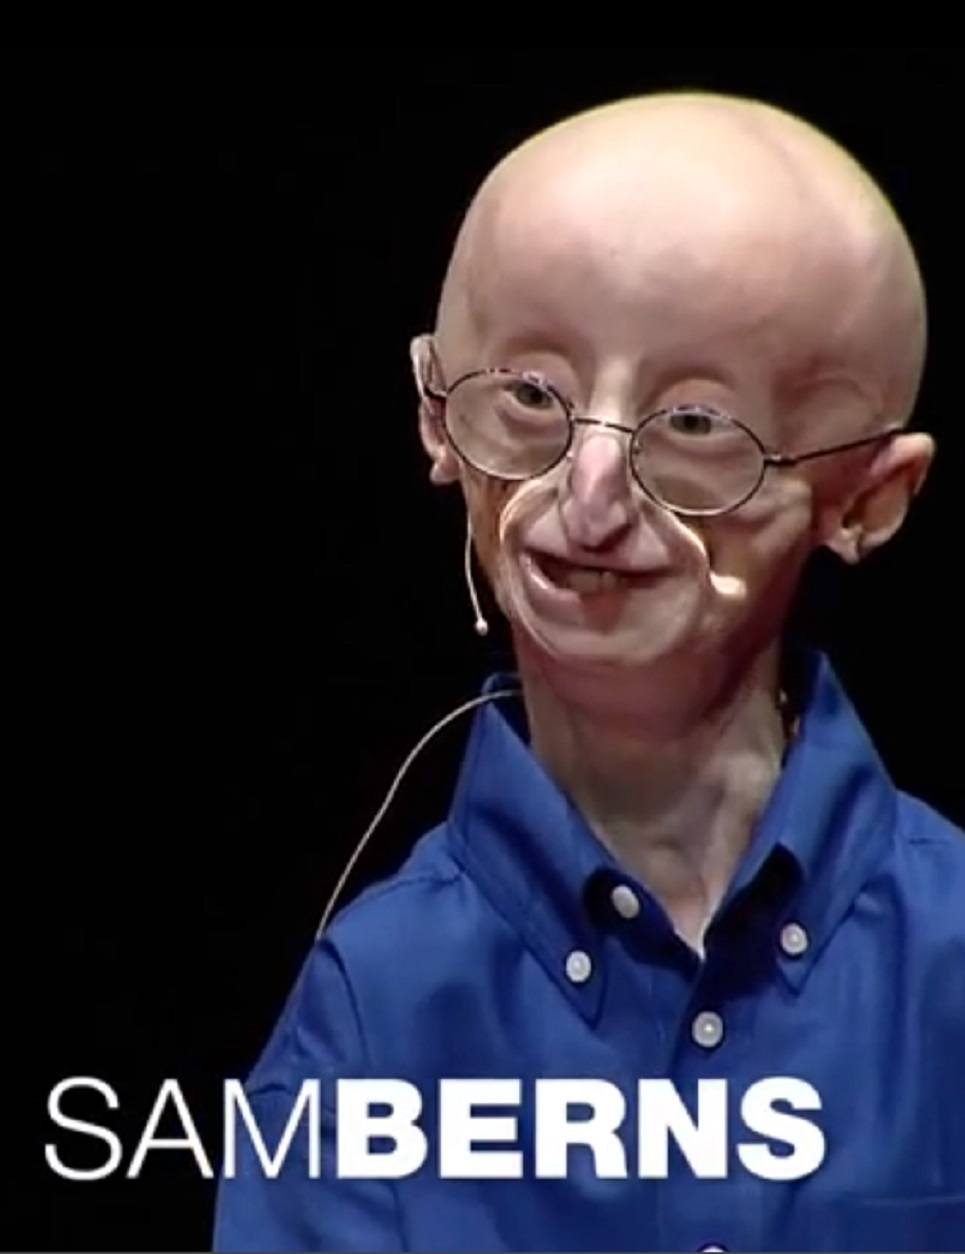 This Kid With Progeria Has a Philosophy For a Happy Life That Will Absolutely Surprise, Astound, Inspire, and Make You Cry!